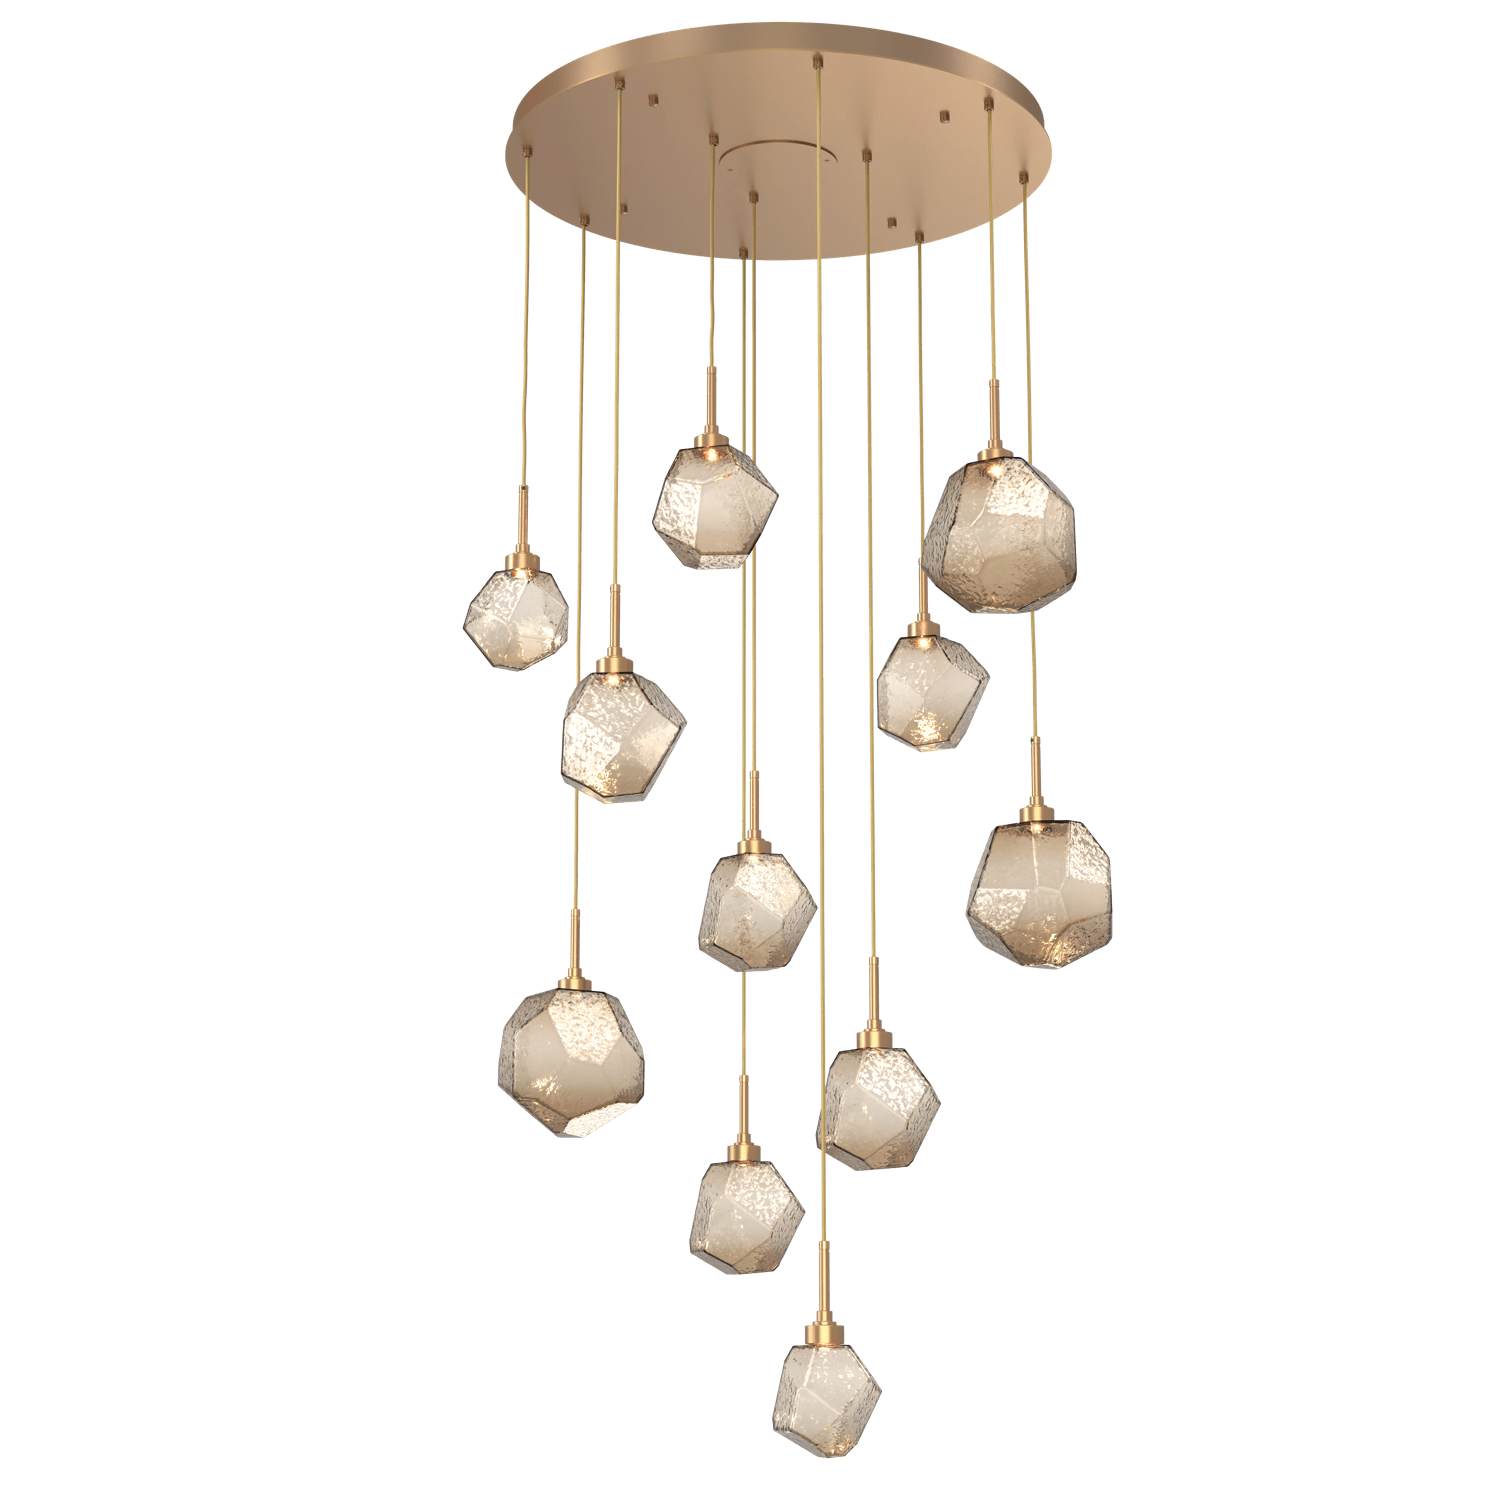 CHB0039-11-NB-B-Hammerton-Studio-Gem-11-light-round-pendant-chandelier-with-novel-brass-finish-and-bronze-blown-glass-shades-and-LED-lamping